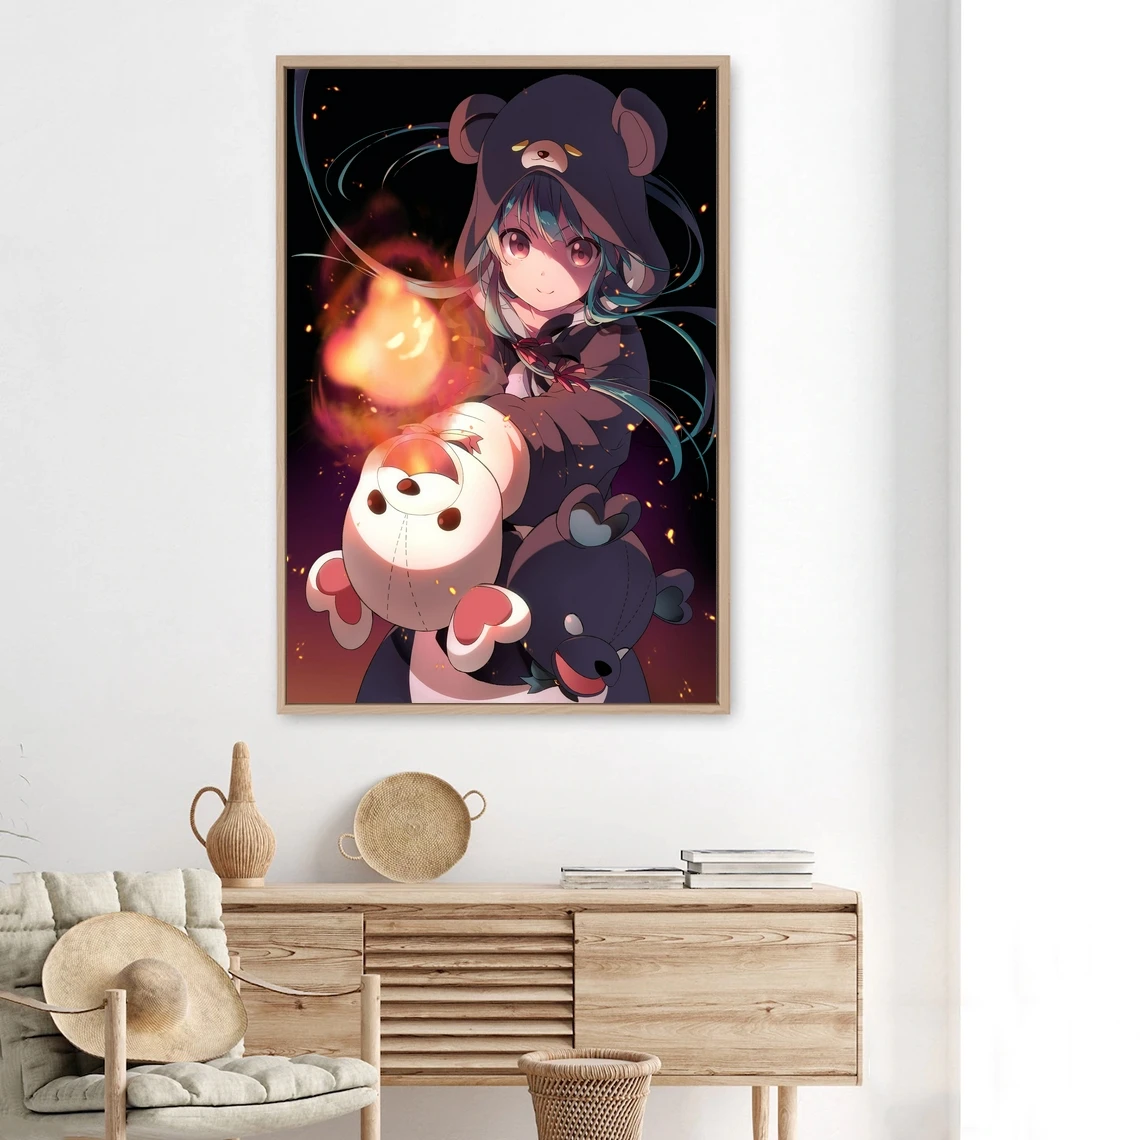 Welcome to the Kuma Bear Anime Poster Canvas Print Wall Painting Home Decoration | Дом и сад